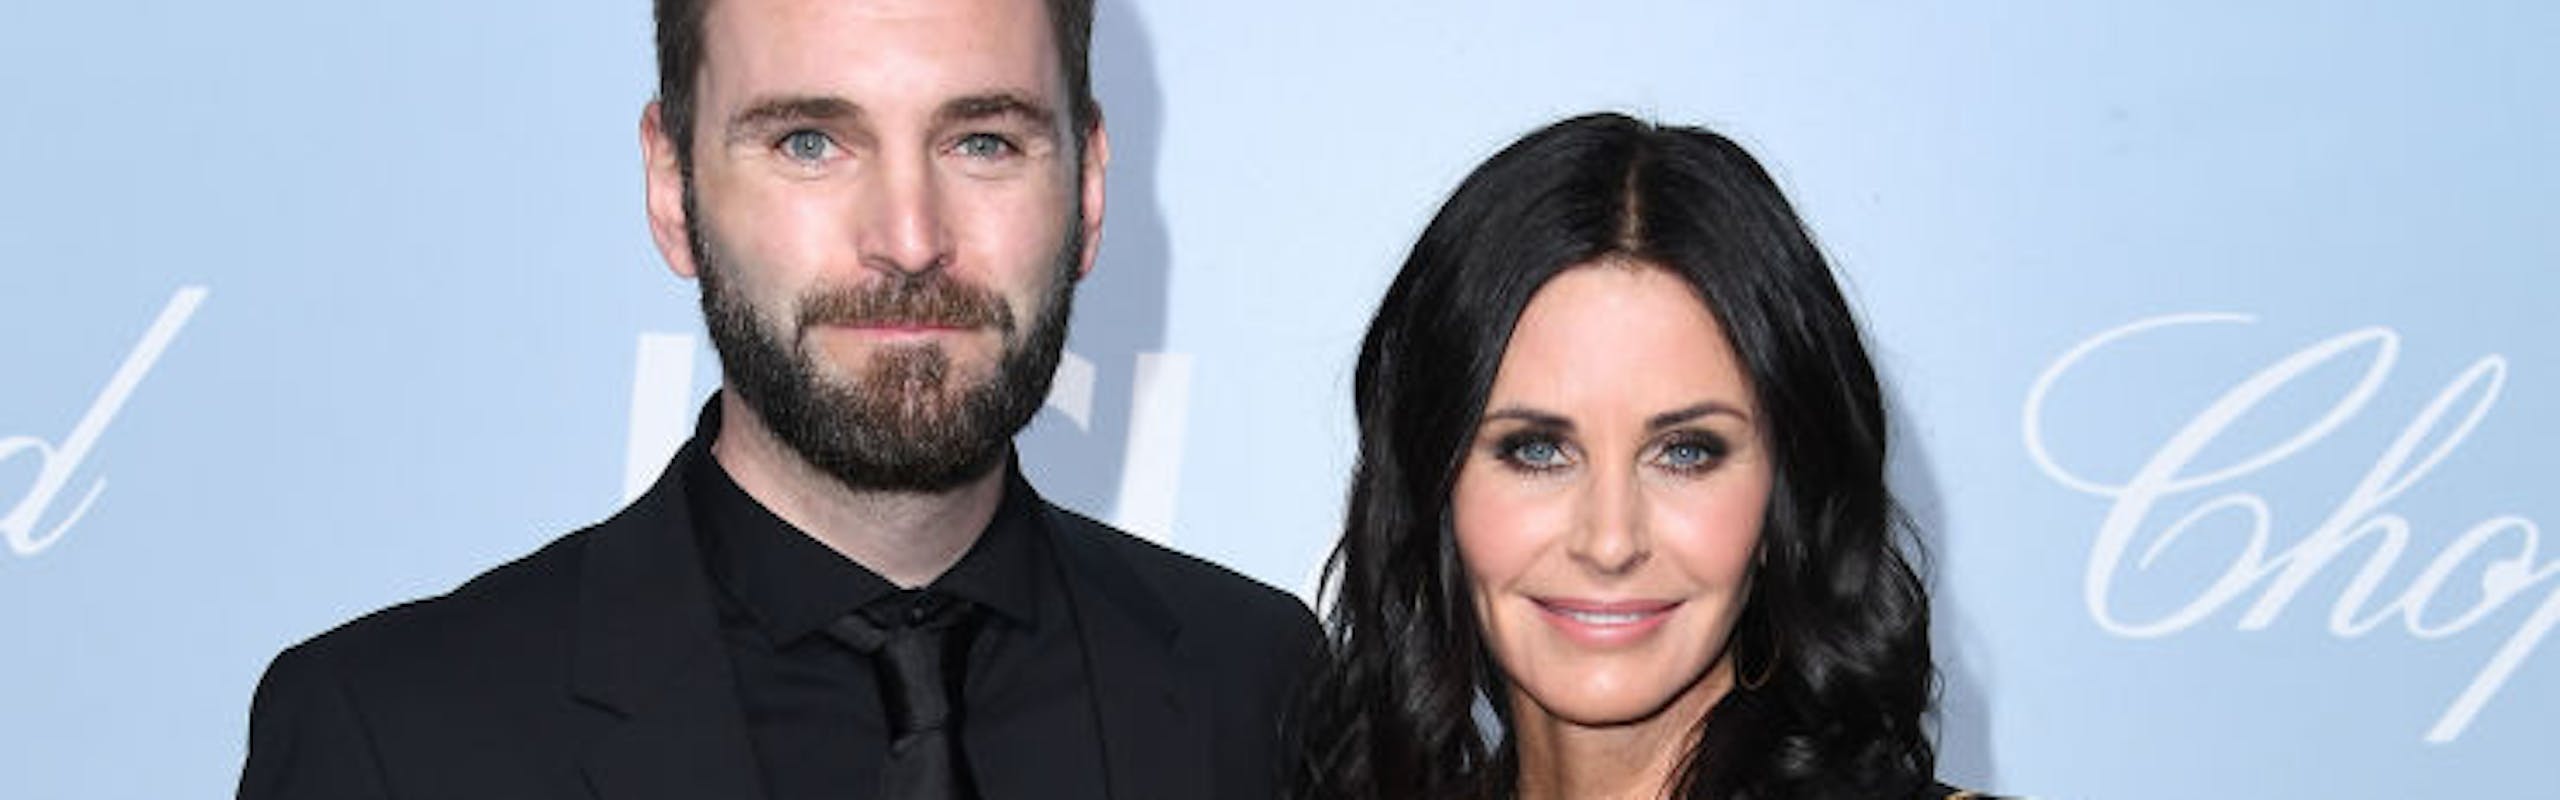 Johnny McDaid e Courteney Cox (Foto: Getty Images)